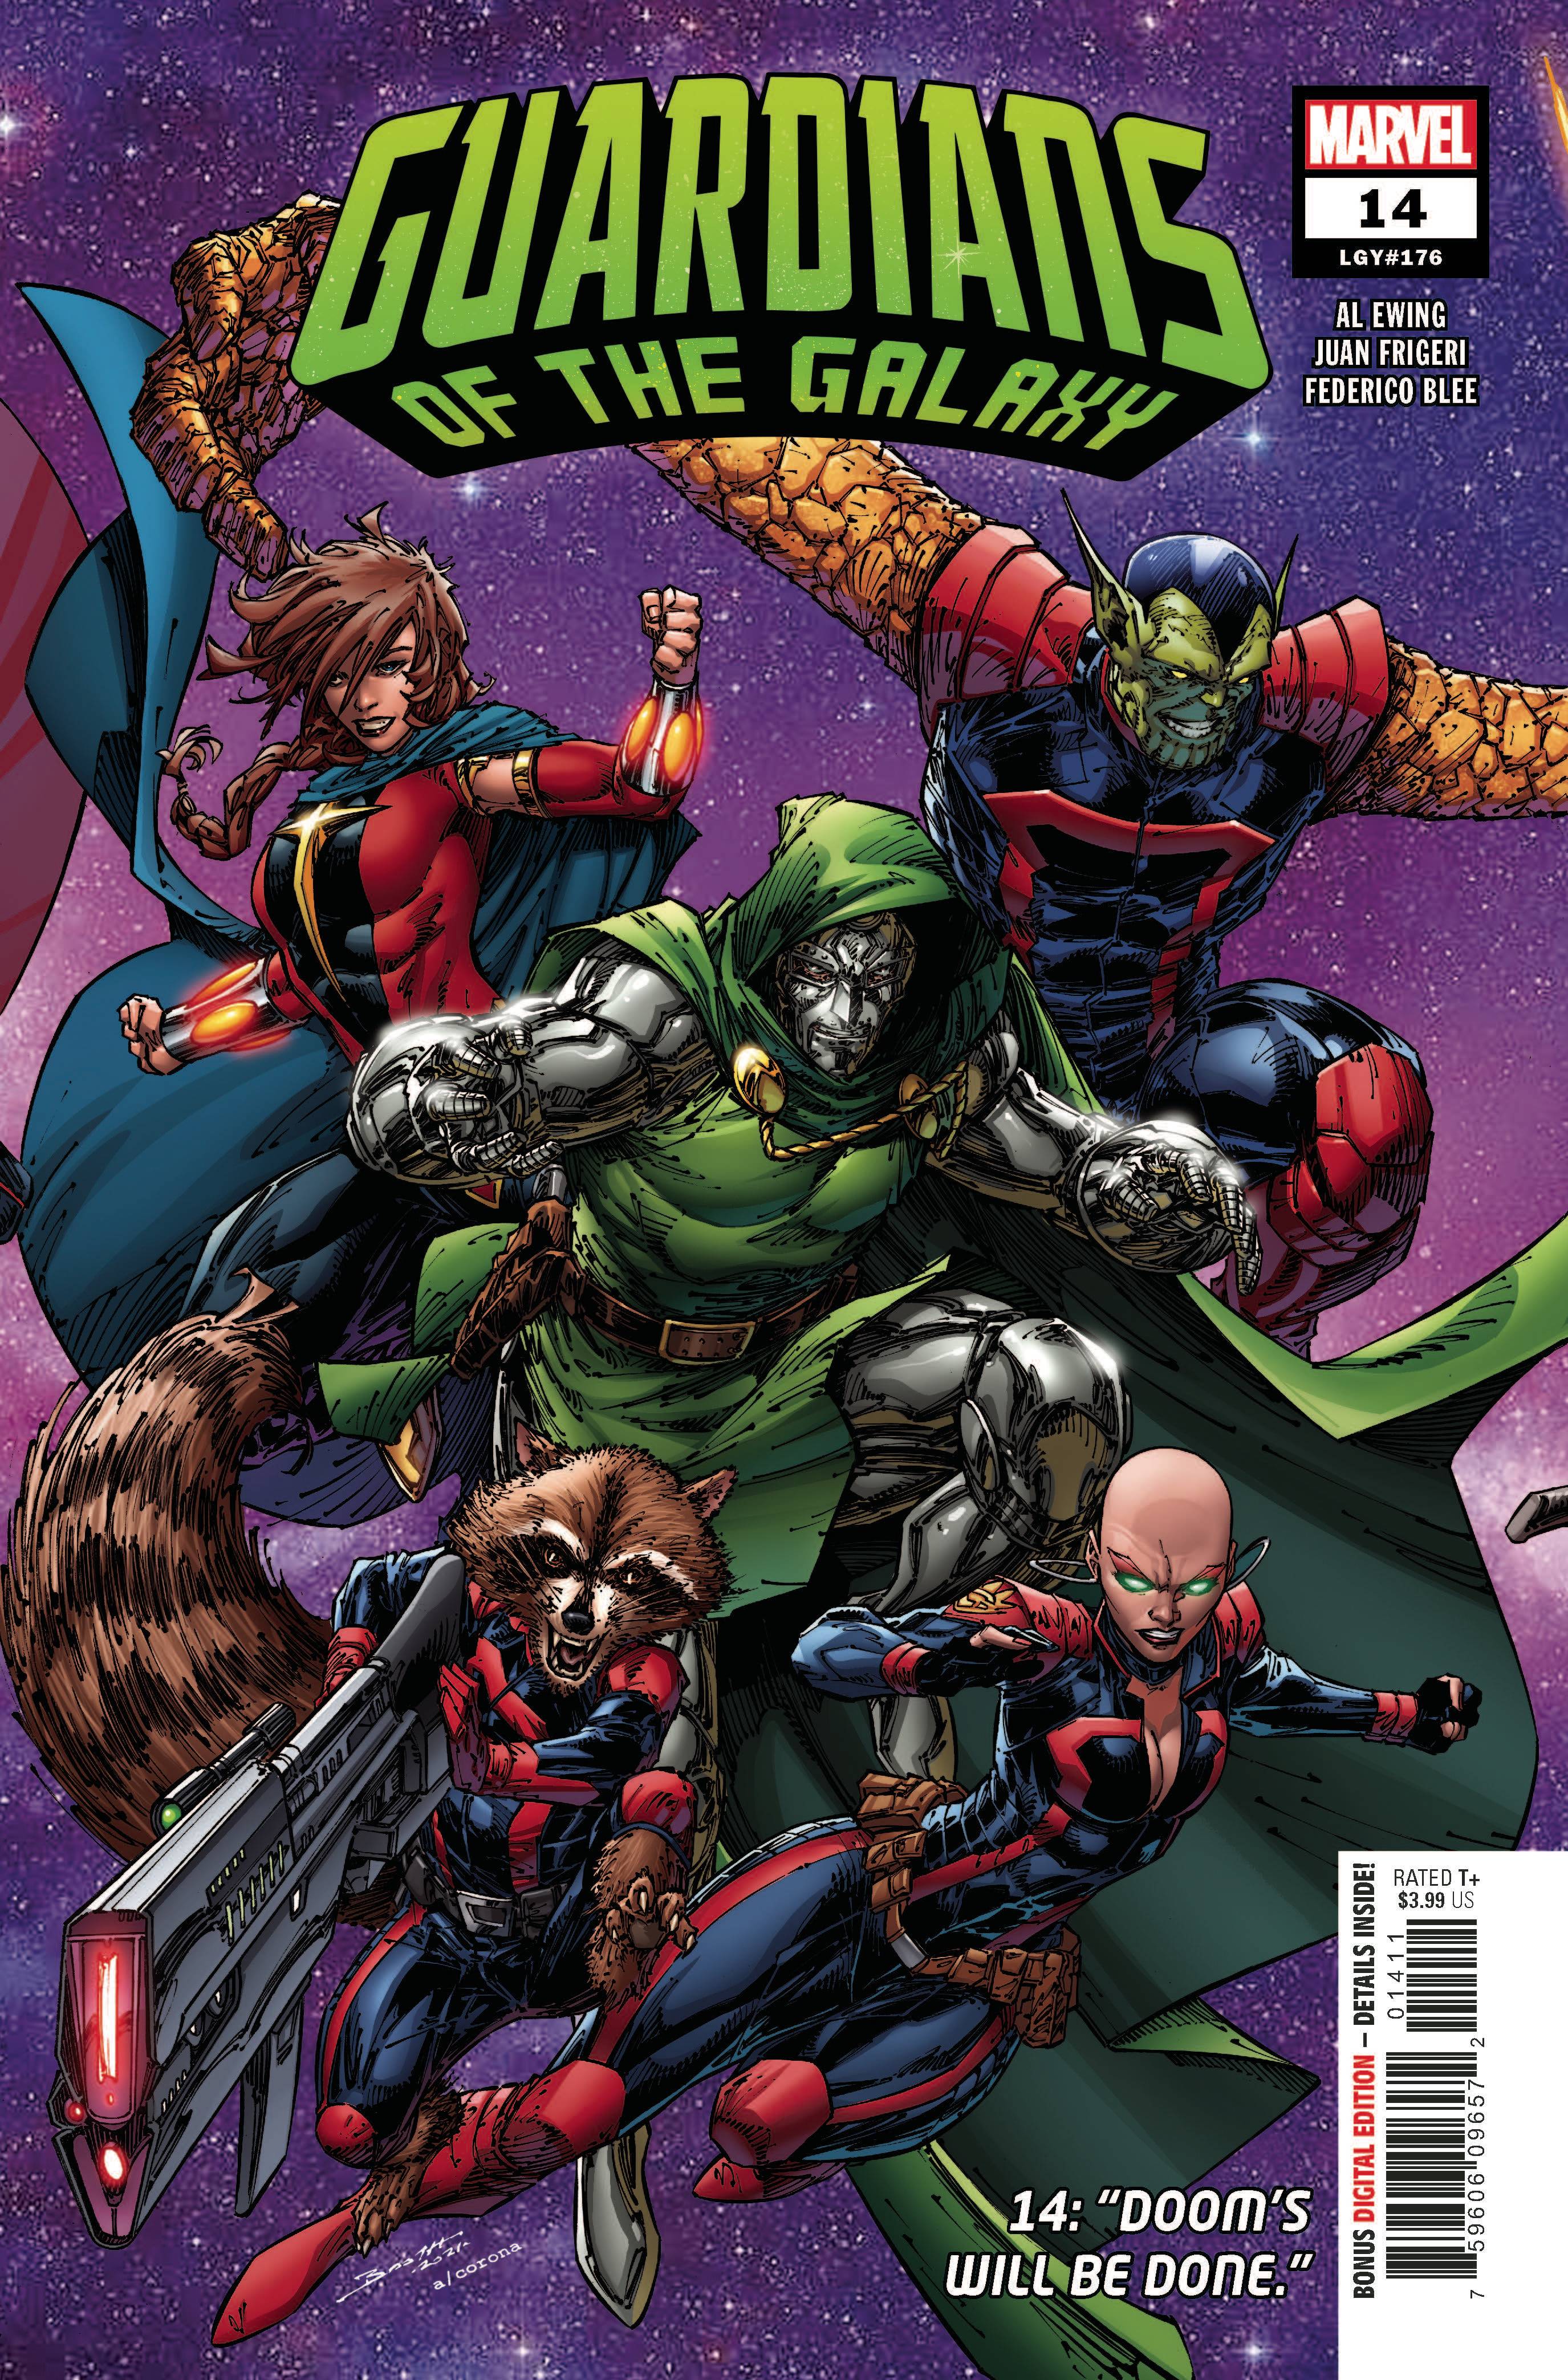 GUARDIANS OF THE GALAXY #14